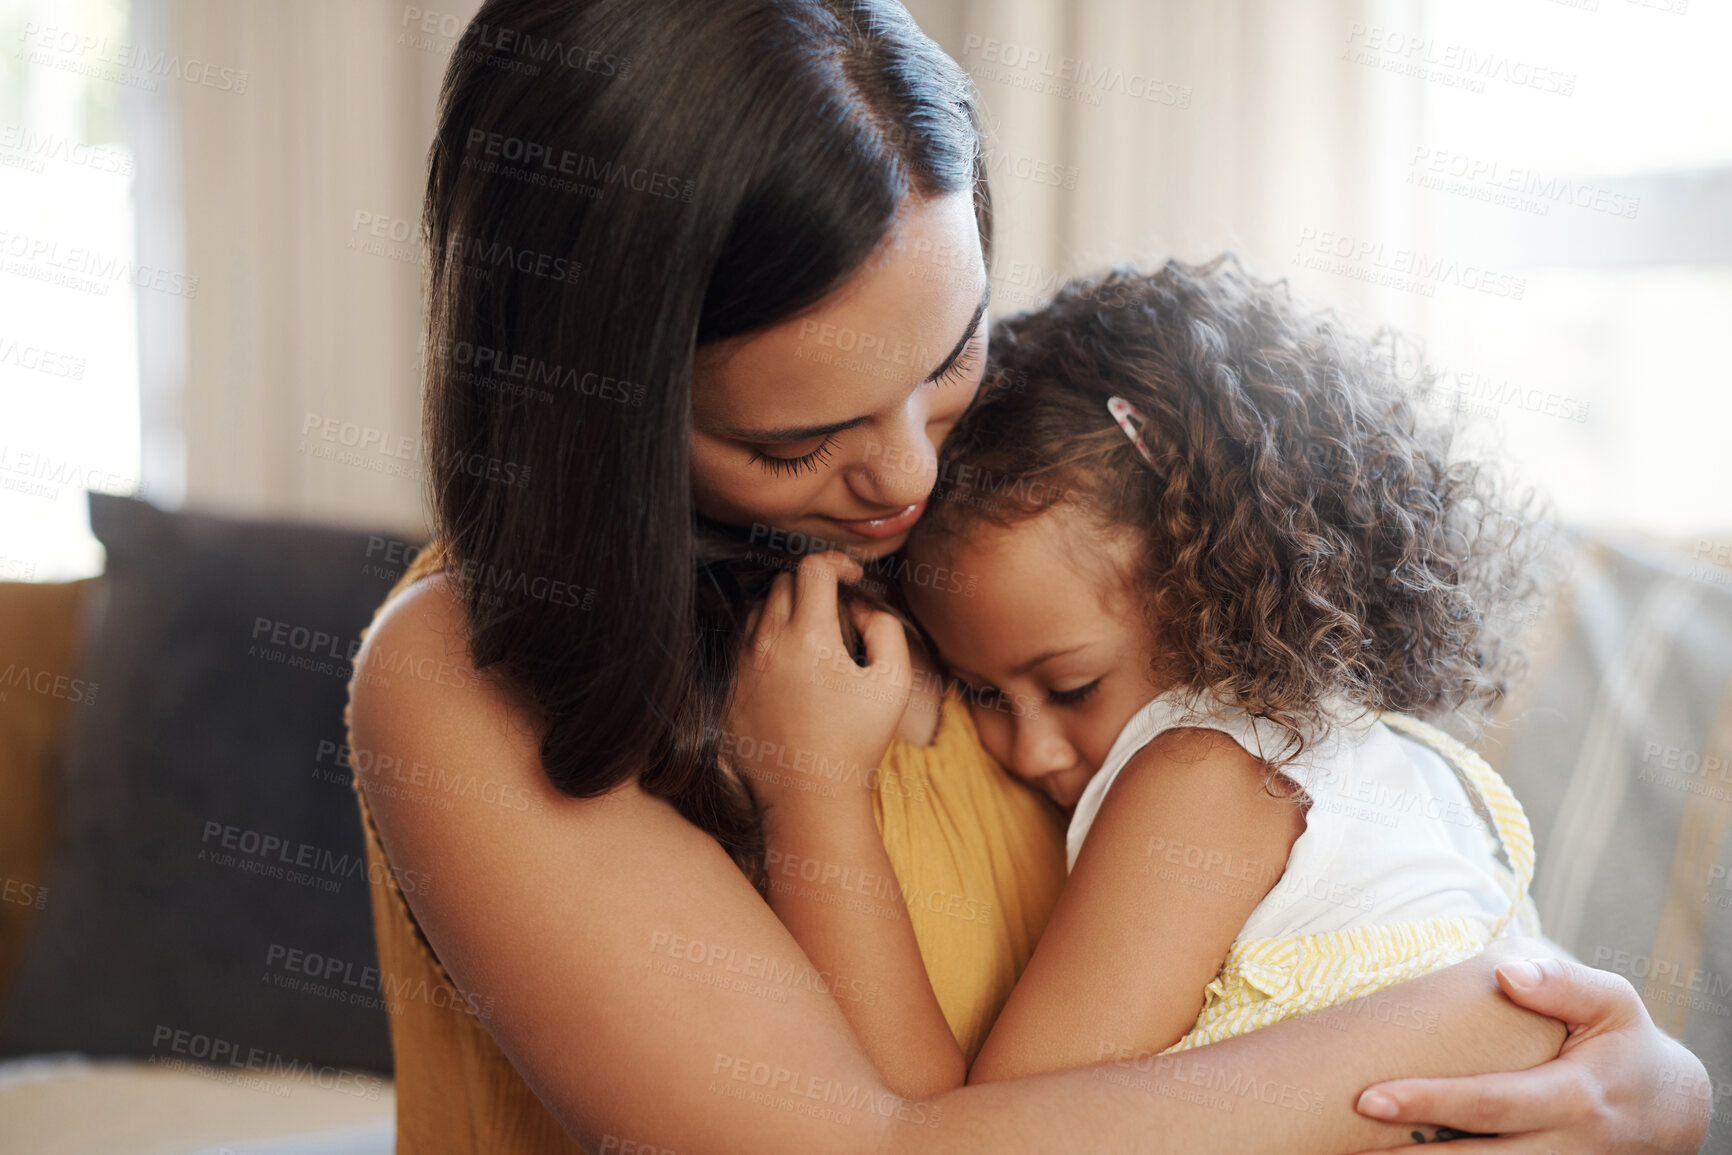 Buy stock photo Shot of an adorable young girl hugging her mother in the living room at home